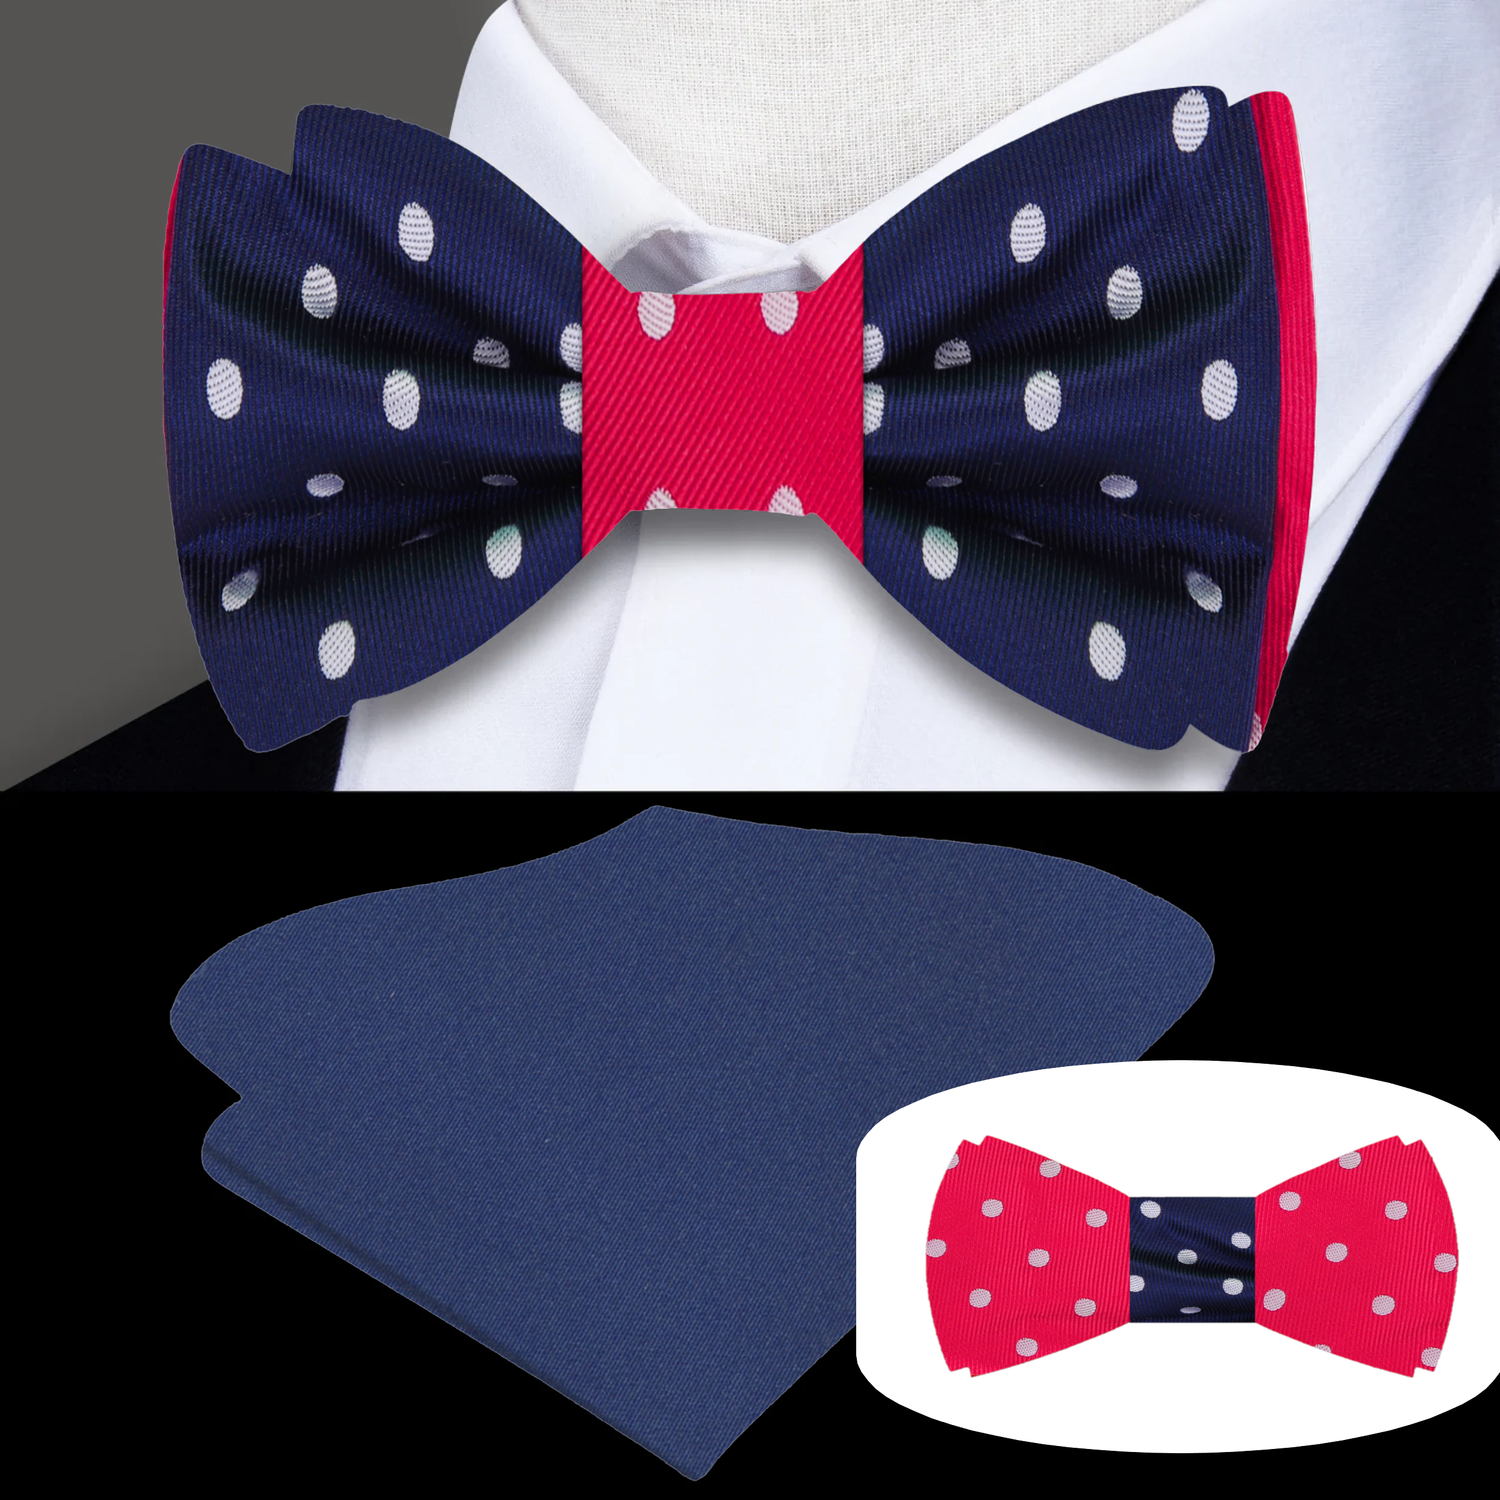 Main: Double Sided Blue, Grey, Red Polka Dot Bow Tie and Blue Square